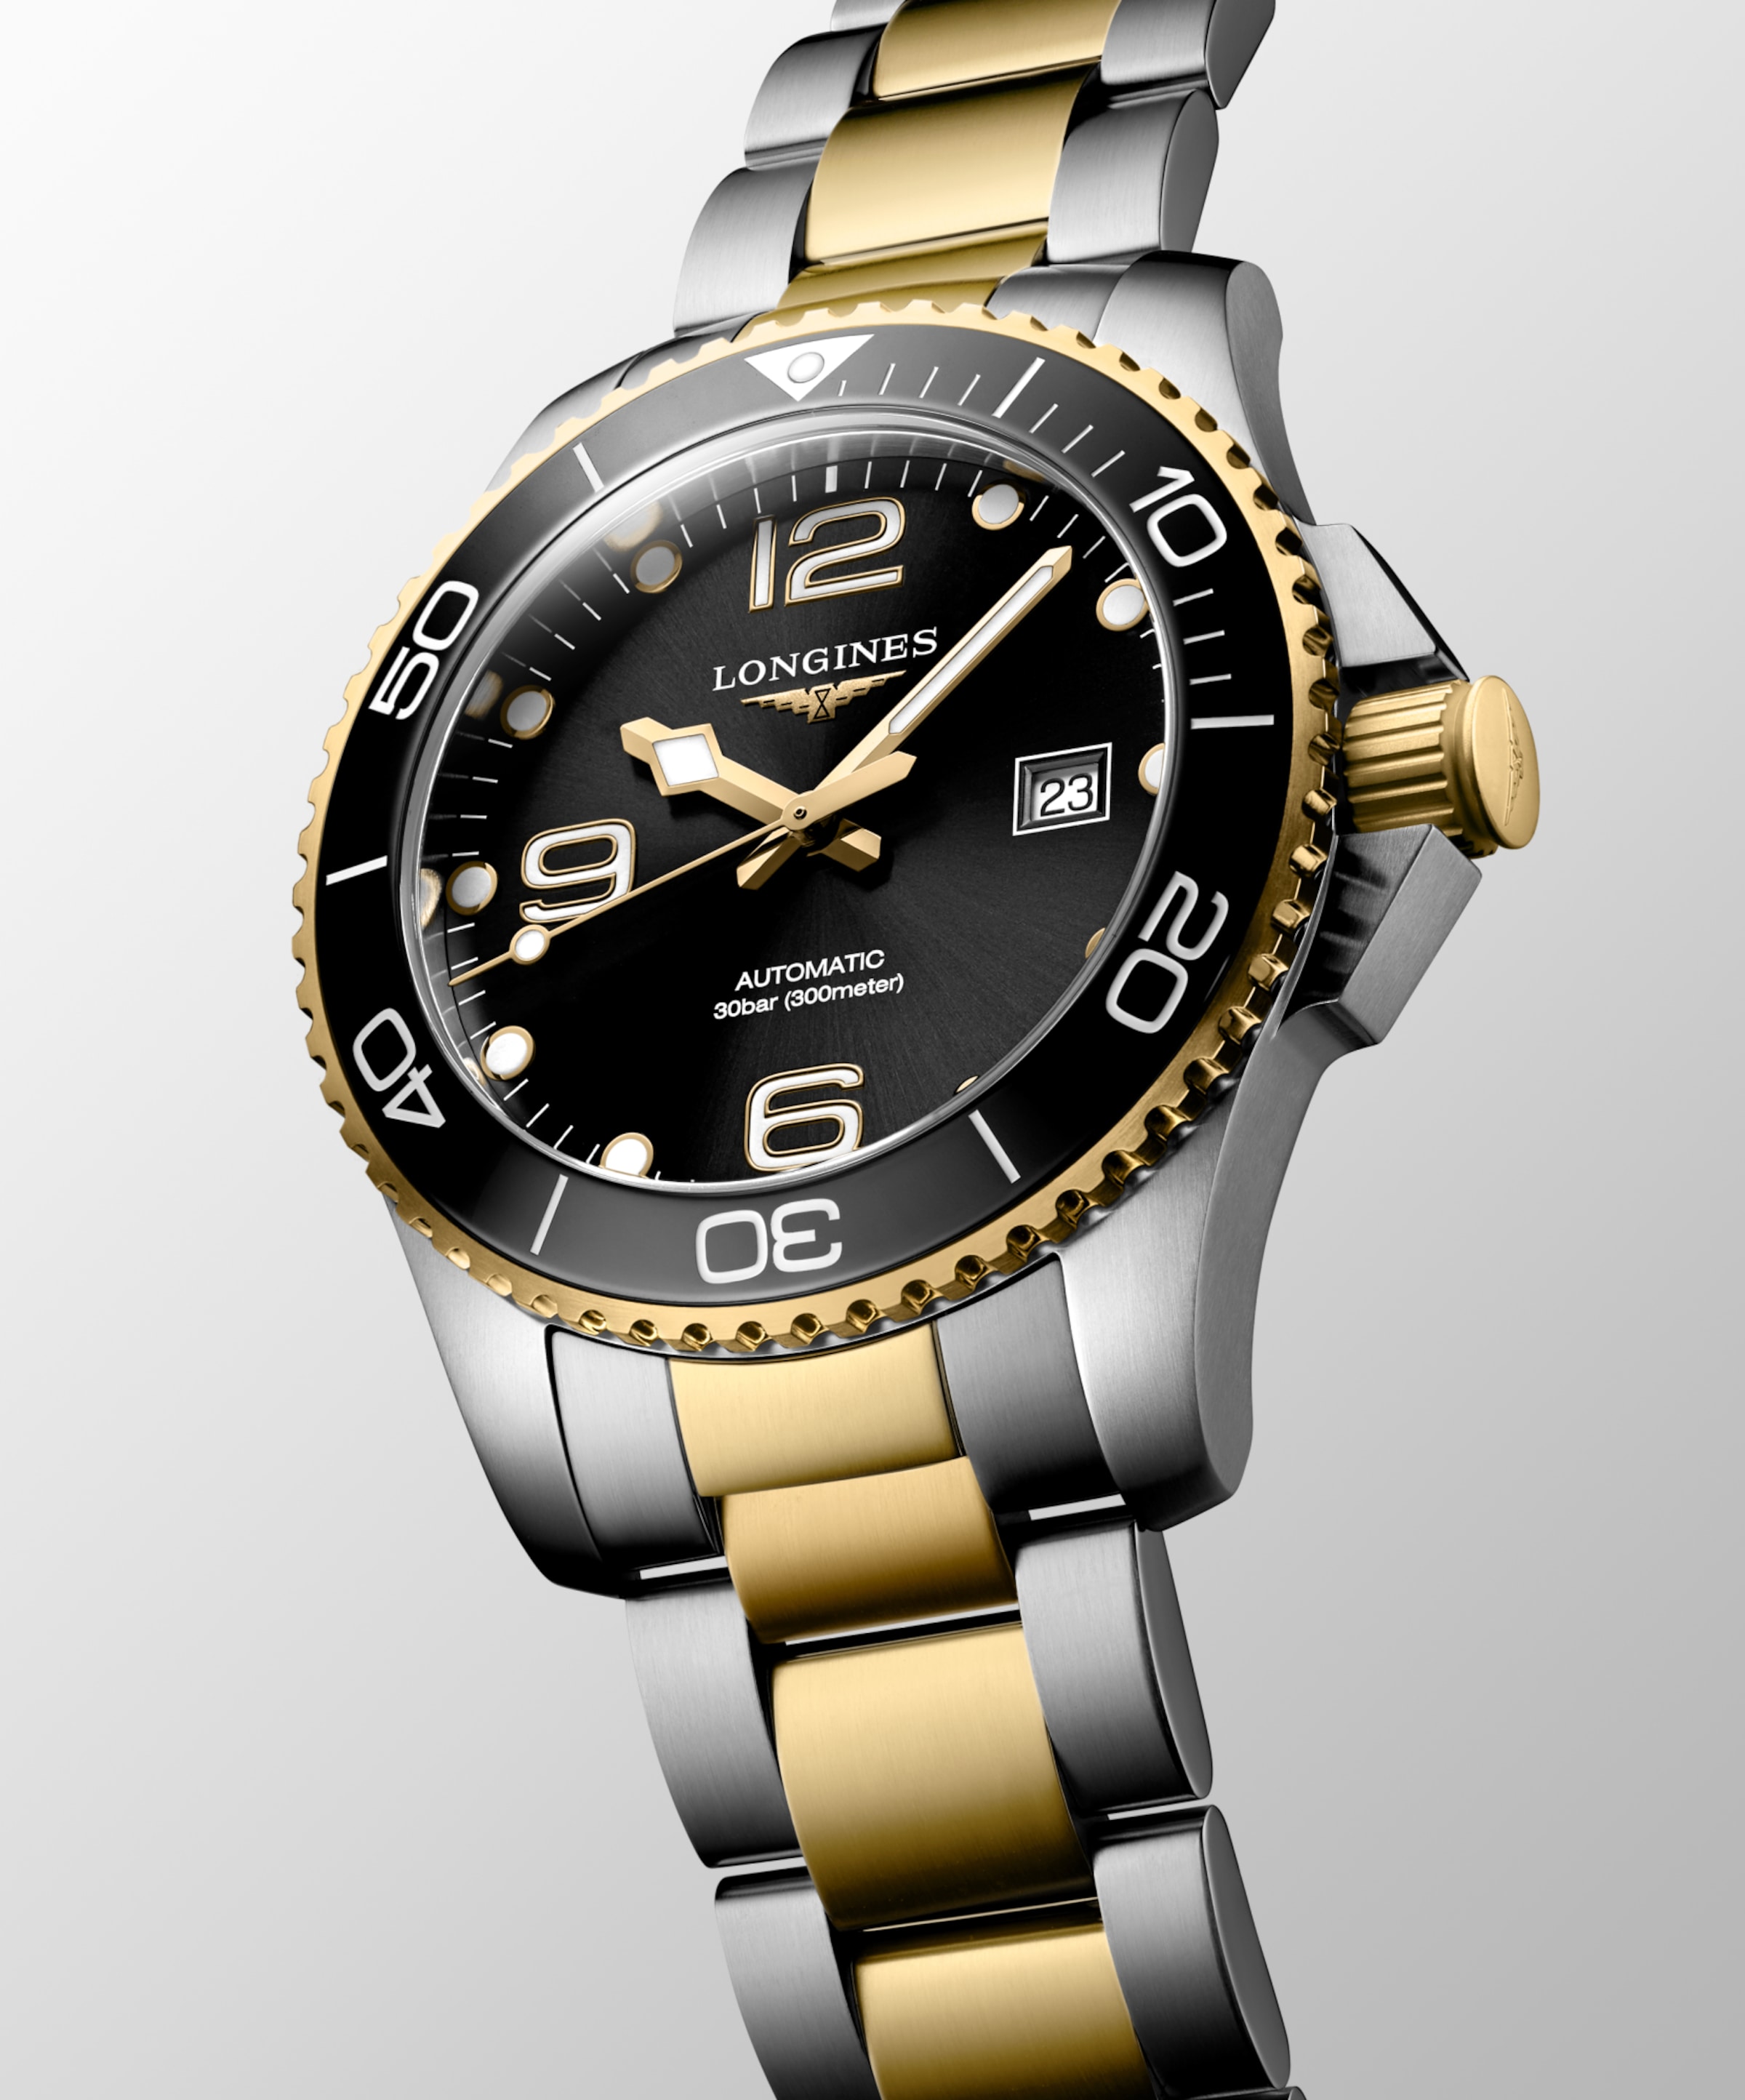 Longines HYDROCONQUEST Automatic Stainless steel and ceramic bezel Watch - L3.782.3.56.7